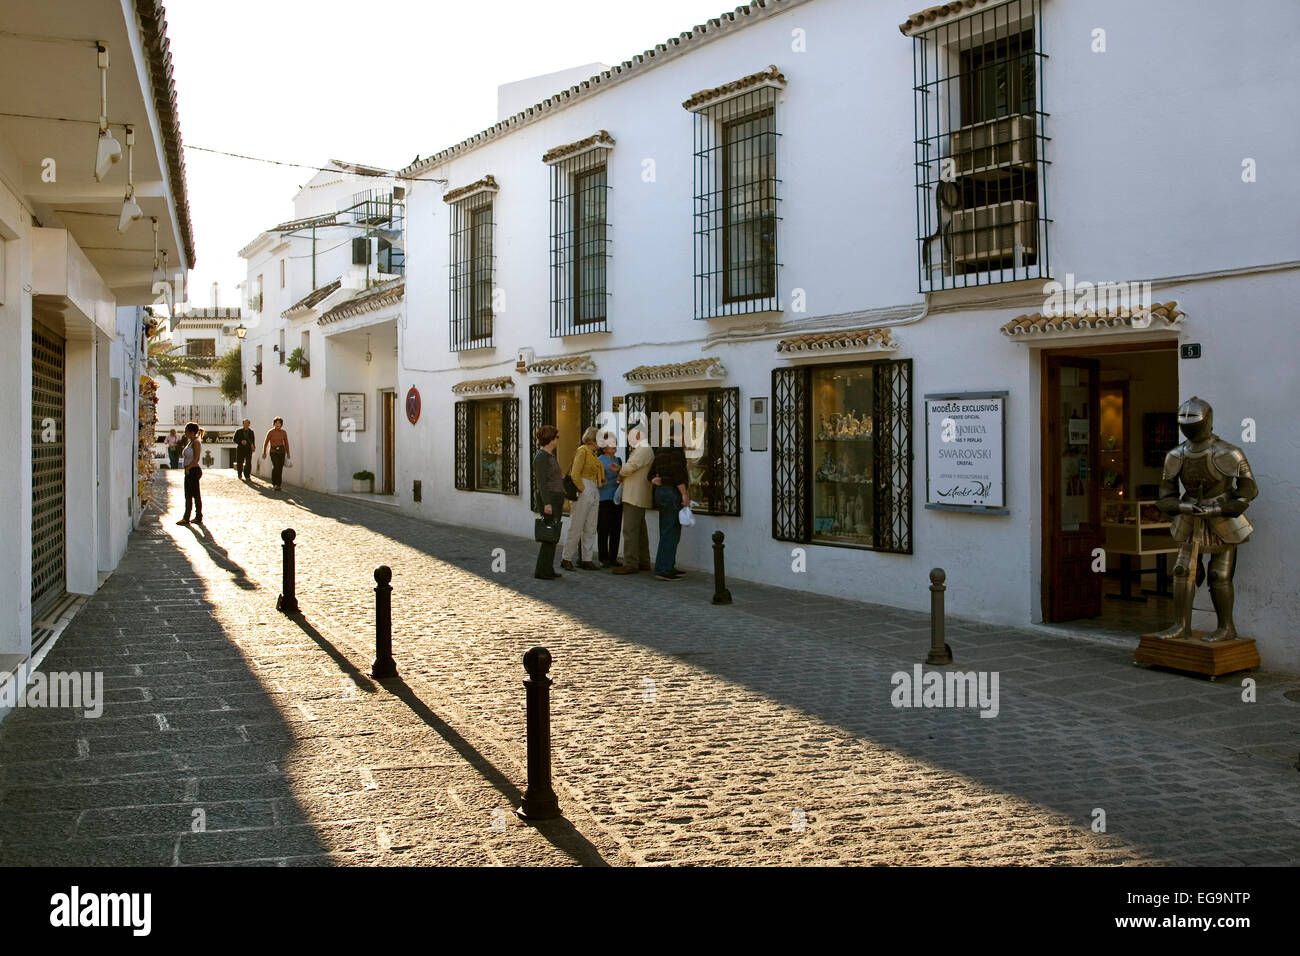 Calle Blanco High Resolution Stock Photography and Images - Alamy